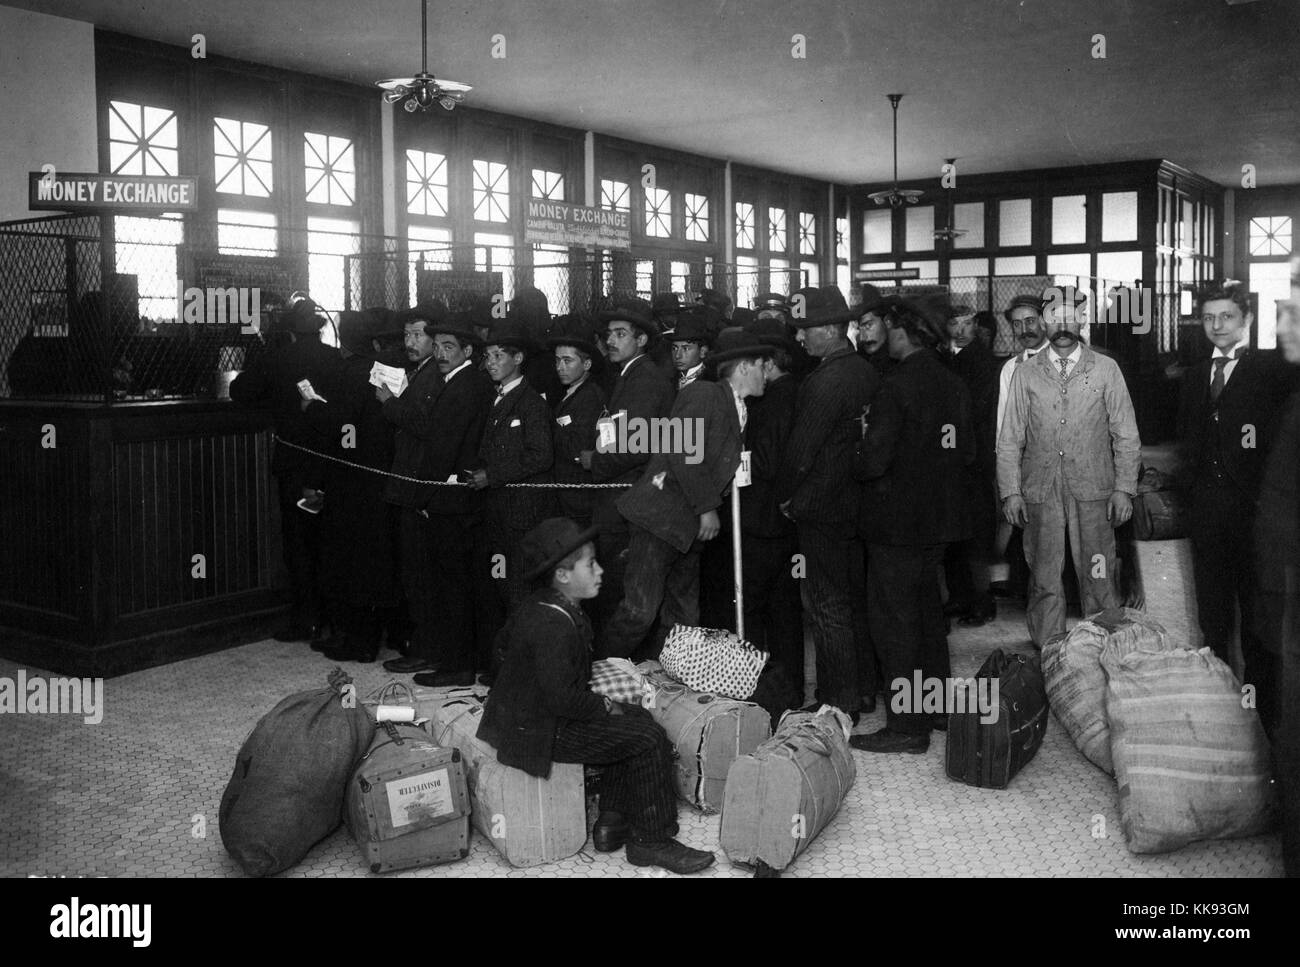 Black and white photograph of a large group of immigrants with baggage lined up at tellers windows marked 'Mone Exchange', by Edwin Levick, Ellis Island, New York, 1907. From the New York Public Library. Stock Photo